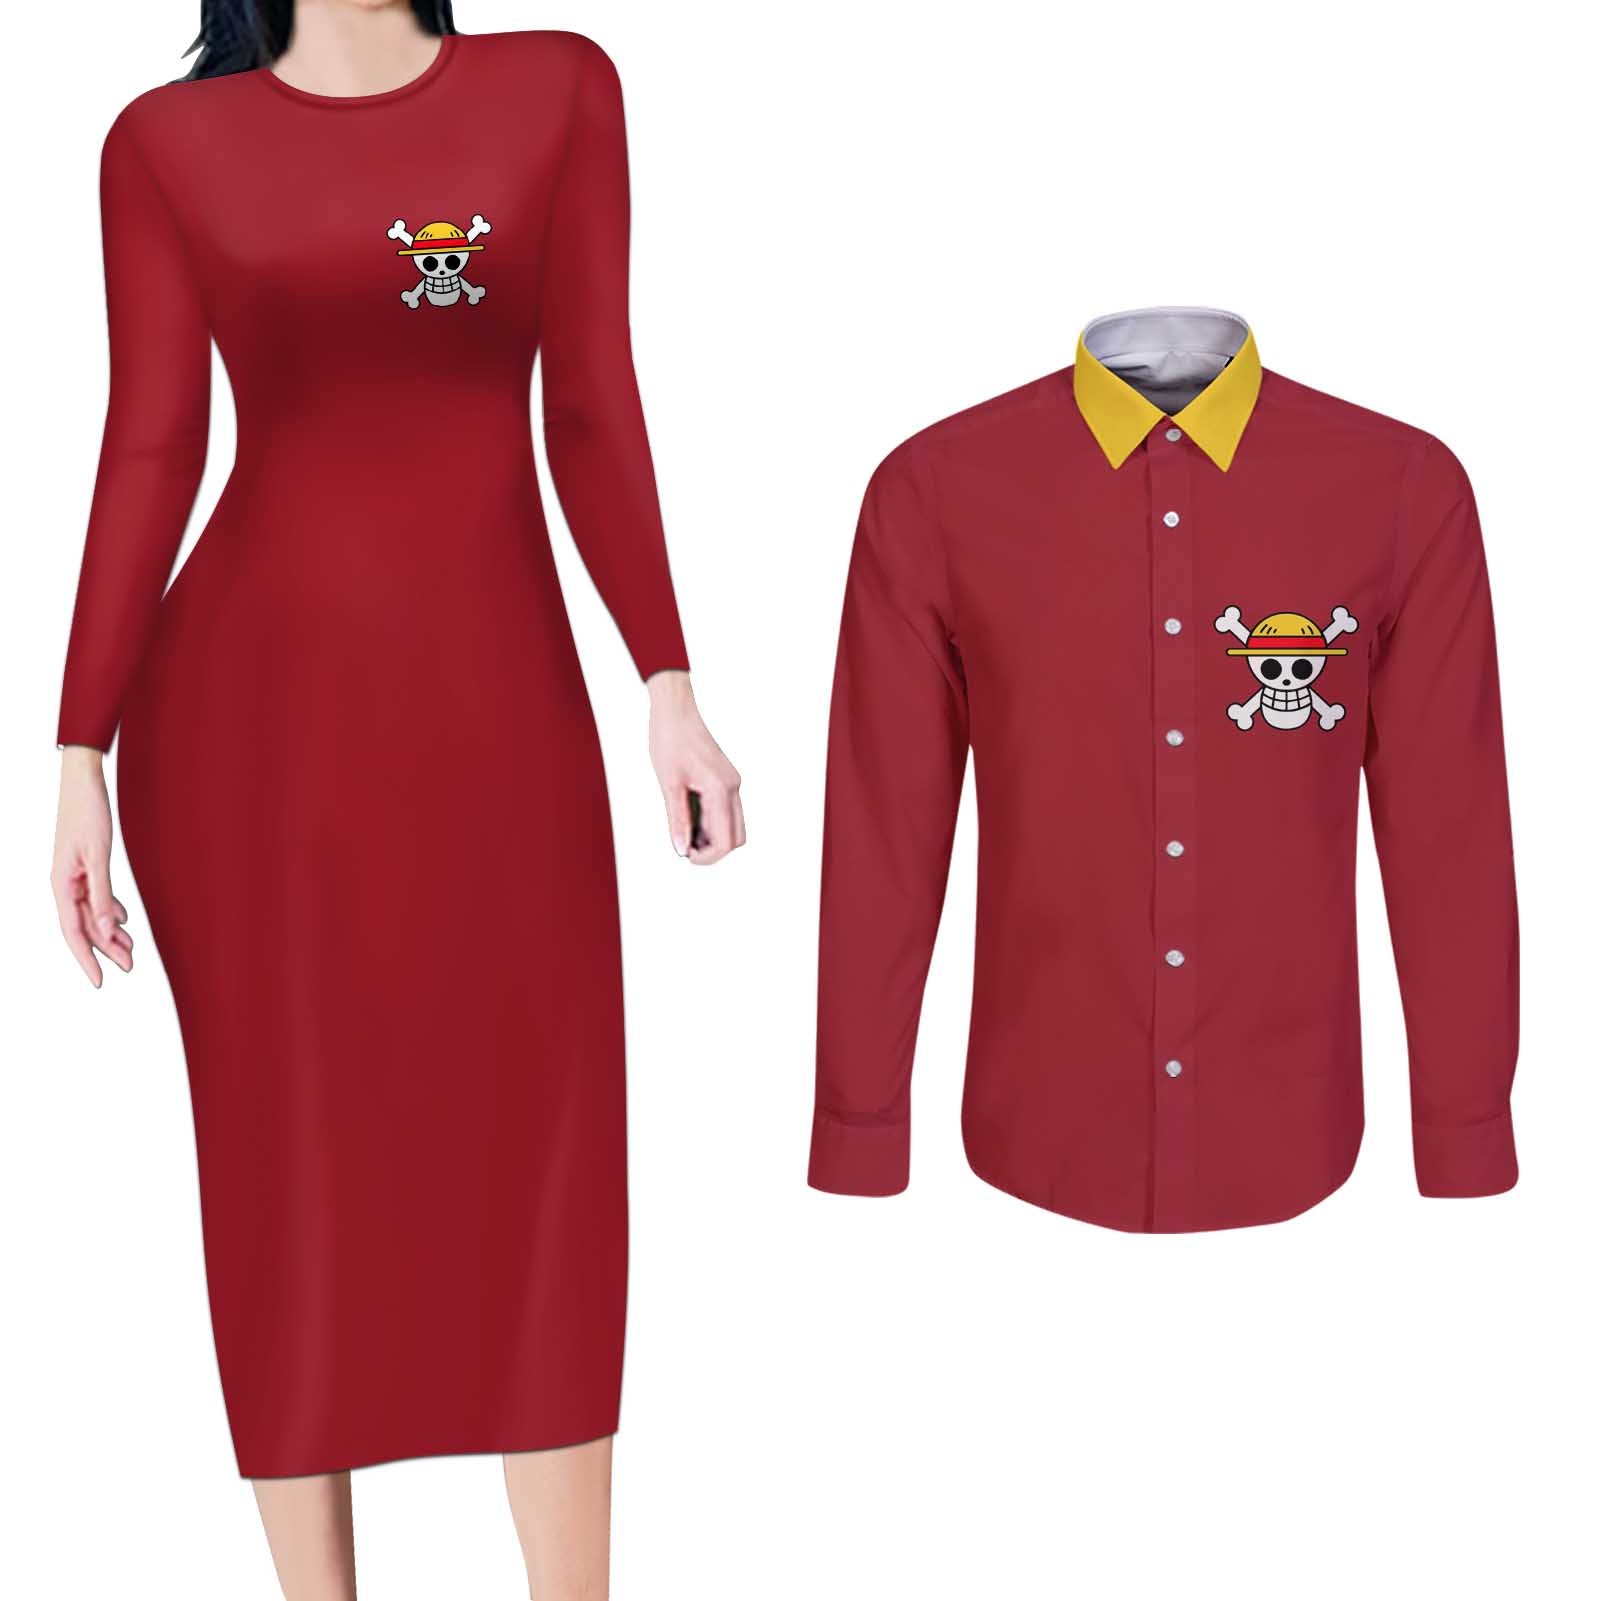 Monkey D. Luffy - One Piece Couples Matching Long Sleeve Bodycon Dress and Long Sleeve Button Shirt Anime Uniform Style